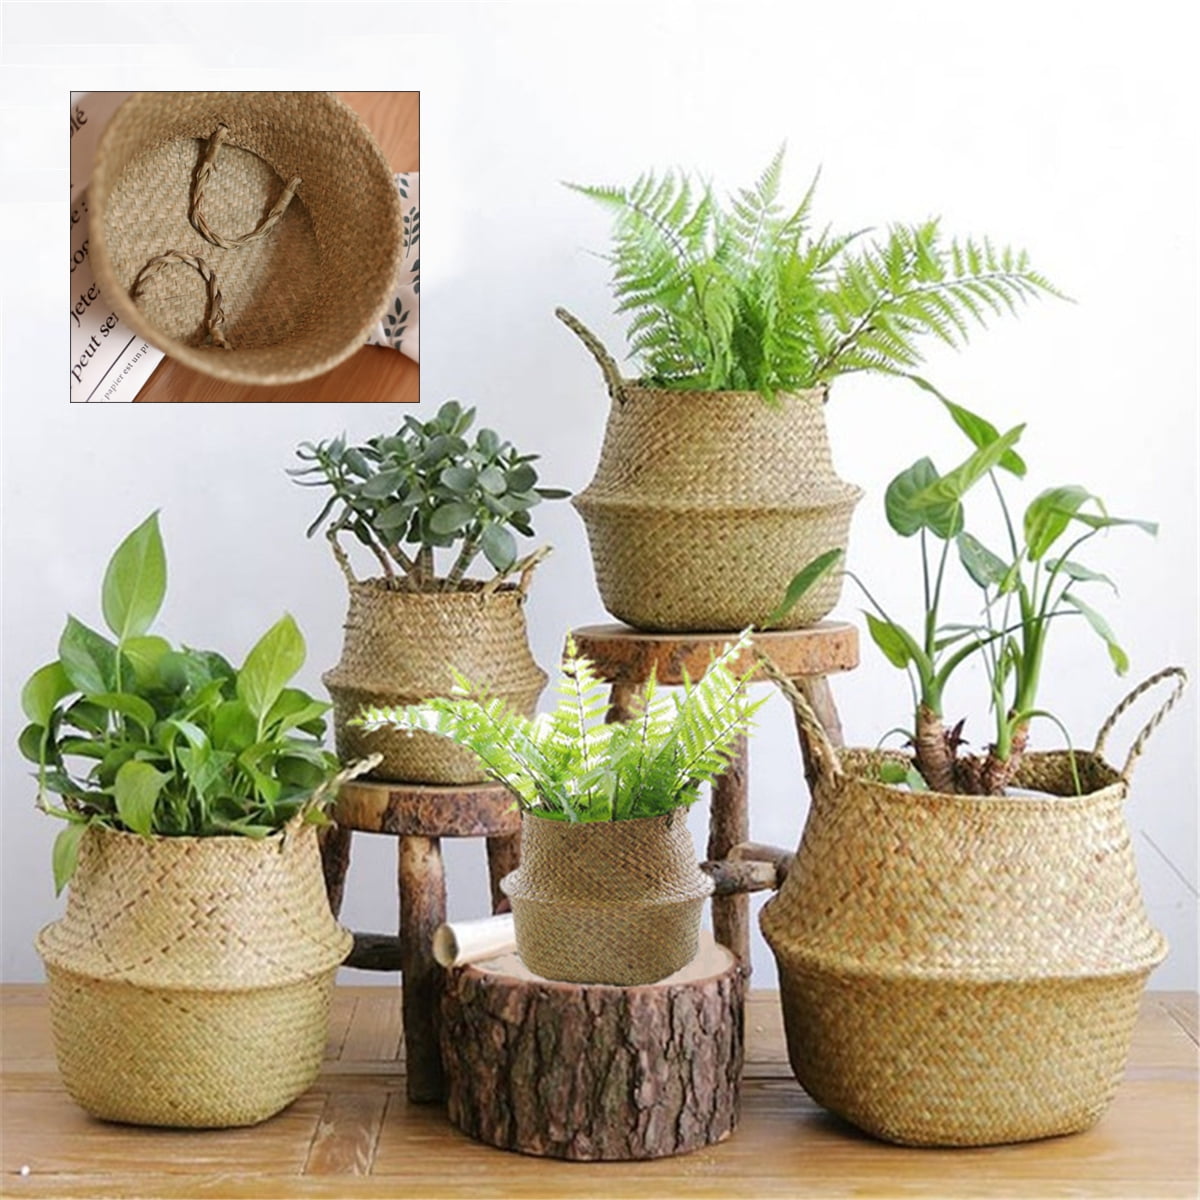 WIVAYE Seagrass Basket Planters,15 x 11cm Plant Basket with Liner Decorative Plant Pots Plant Containers Storage Basket for Indoor Outdoor